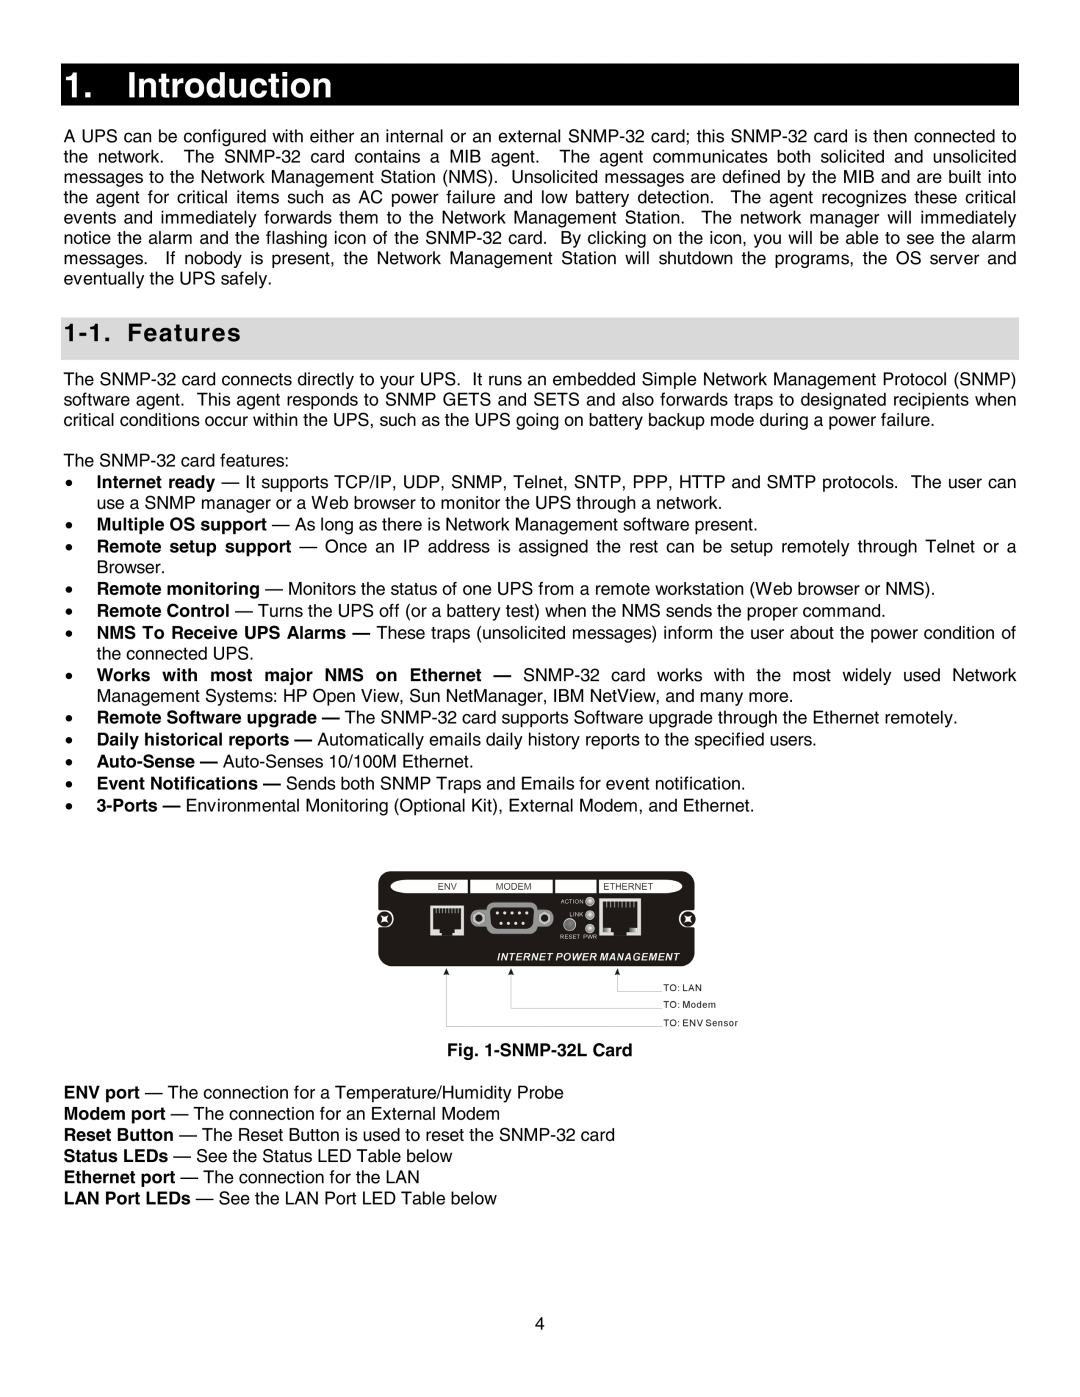 Minuteman UPS SNMP-32 Series user manual Introduction, Features, SNMP-32L Card 